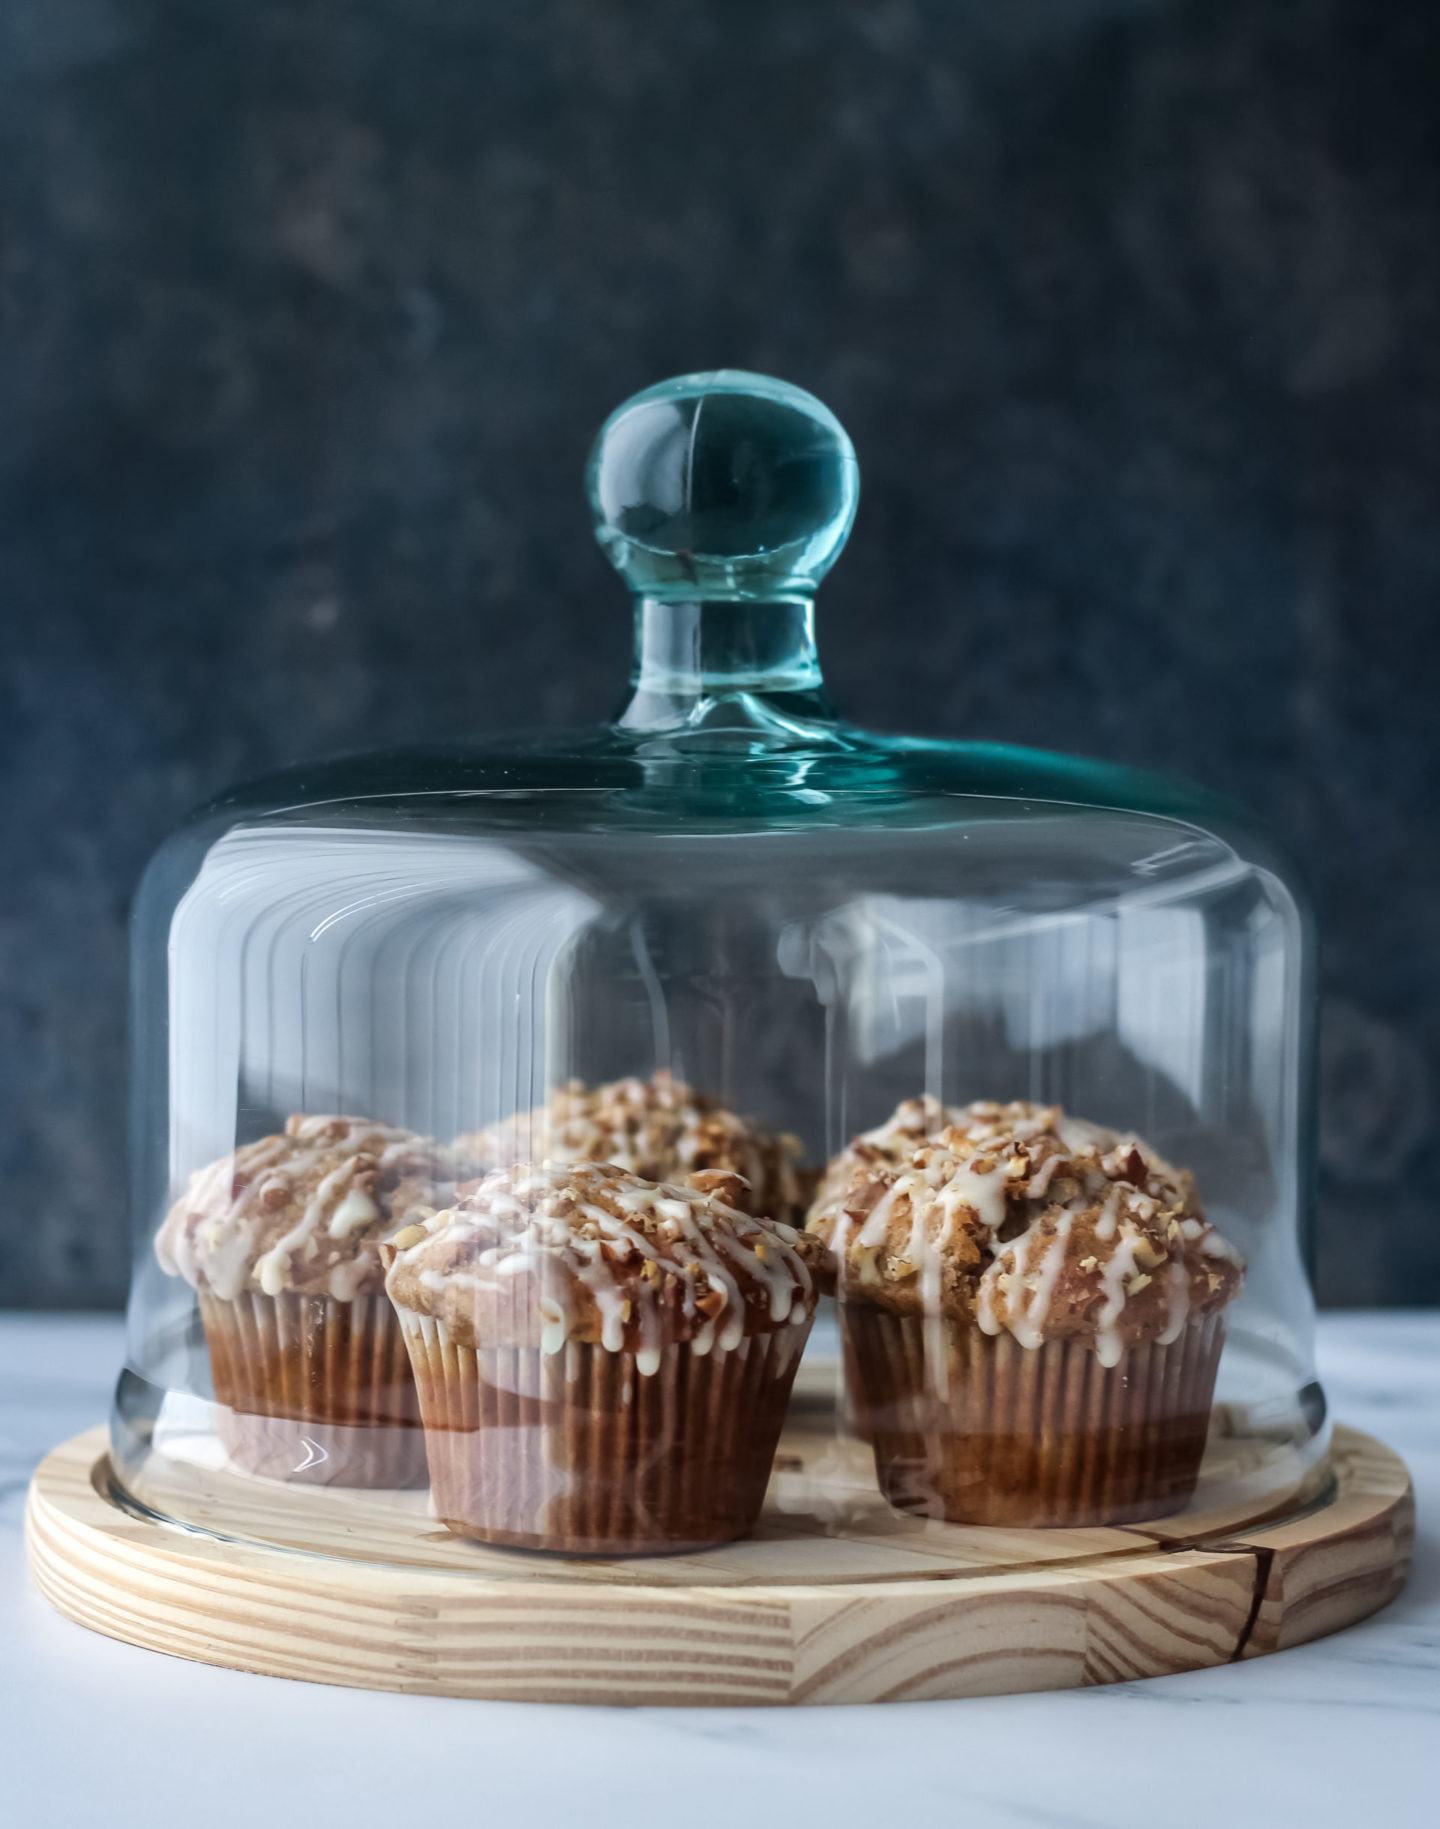 muffins in cake display stand